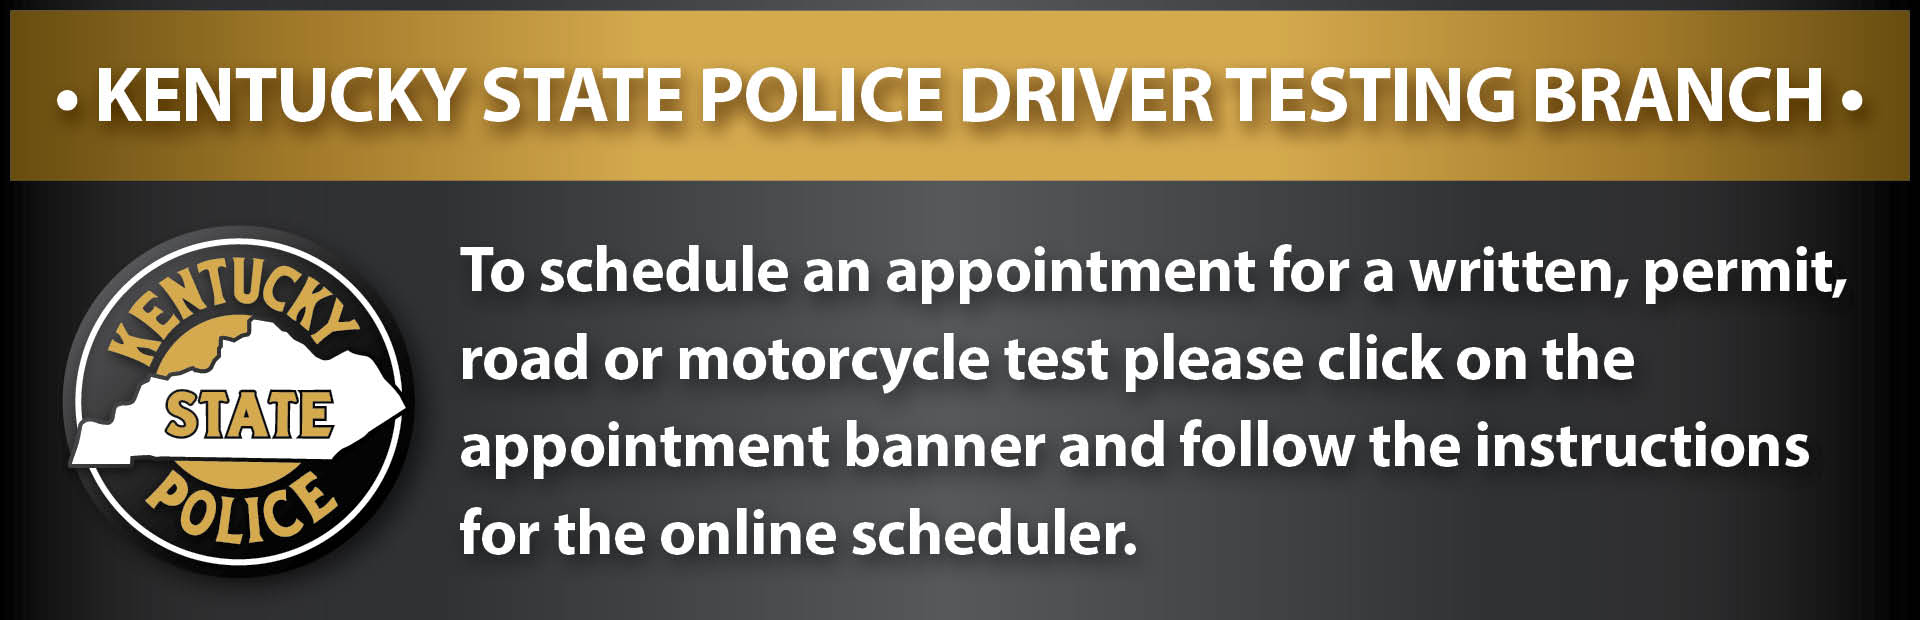 Driver Licensing Testing Scheduling & Appointments 1 NEW